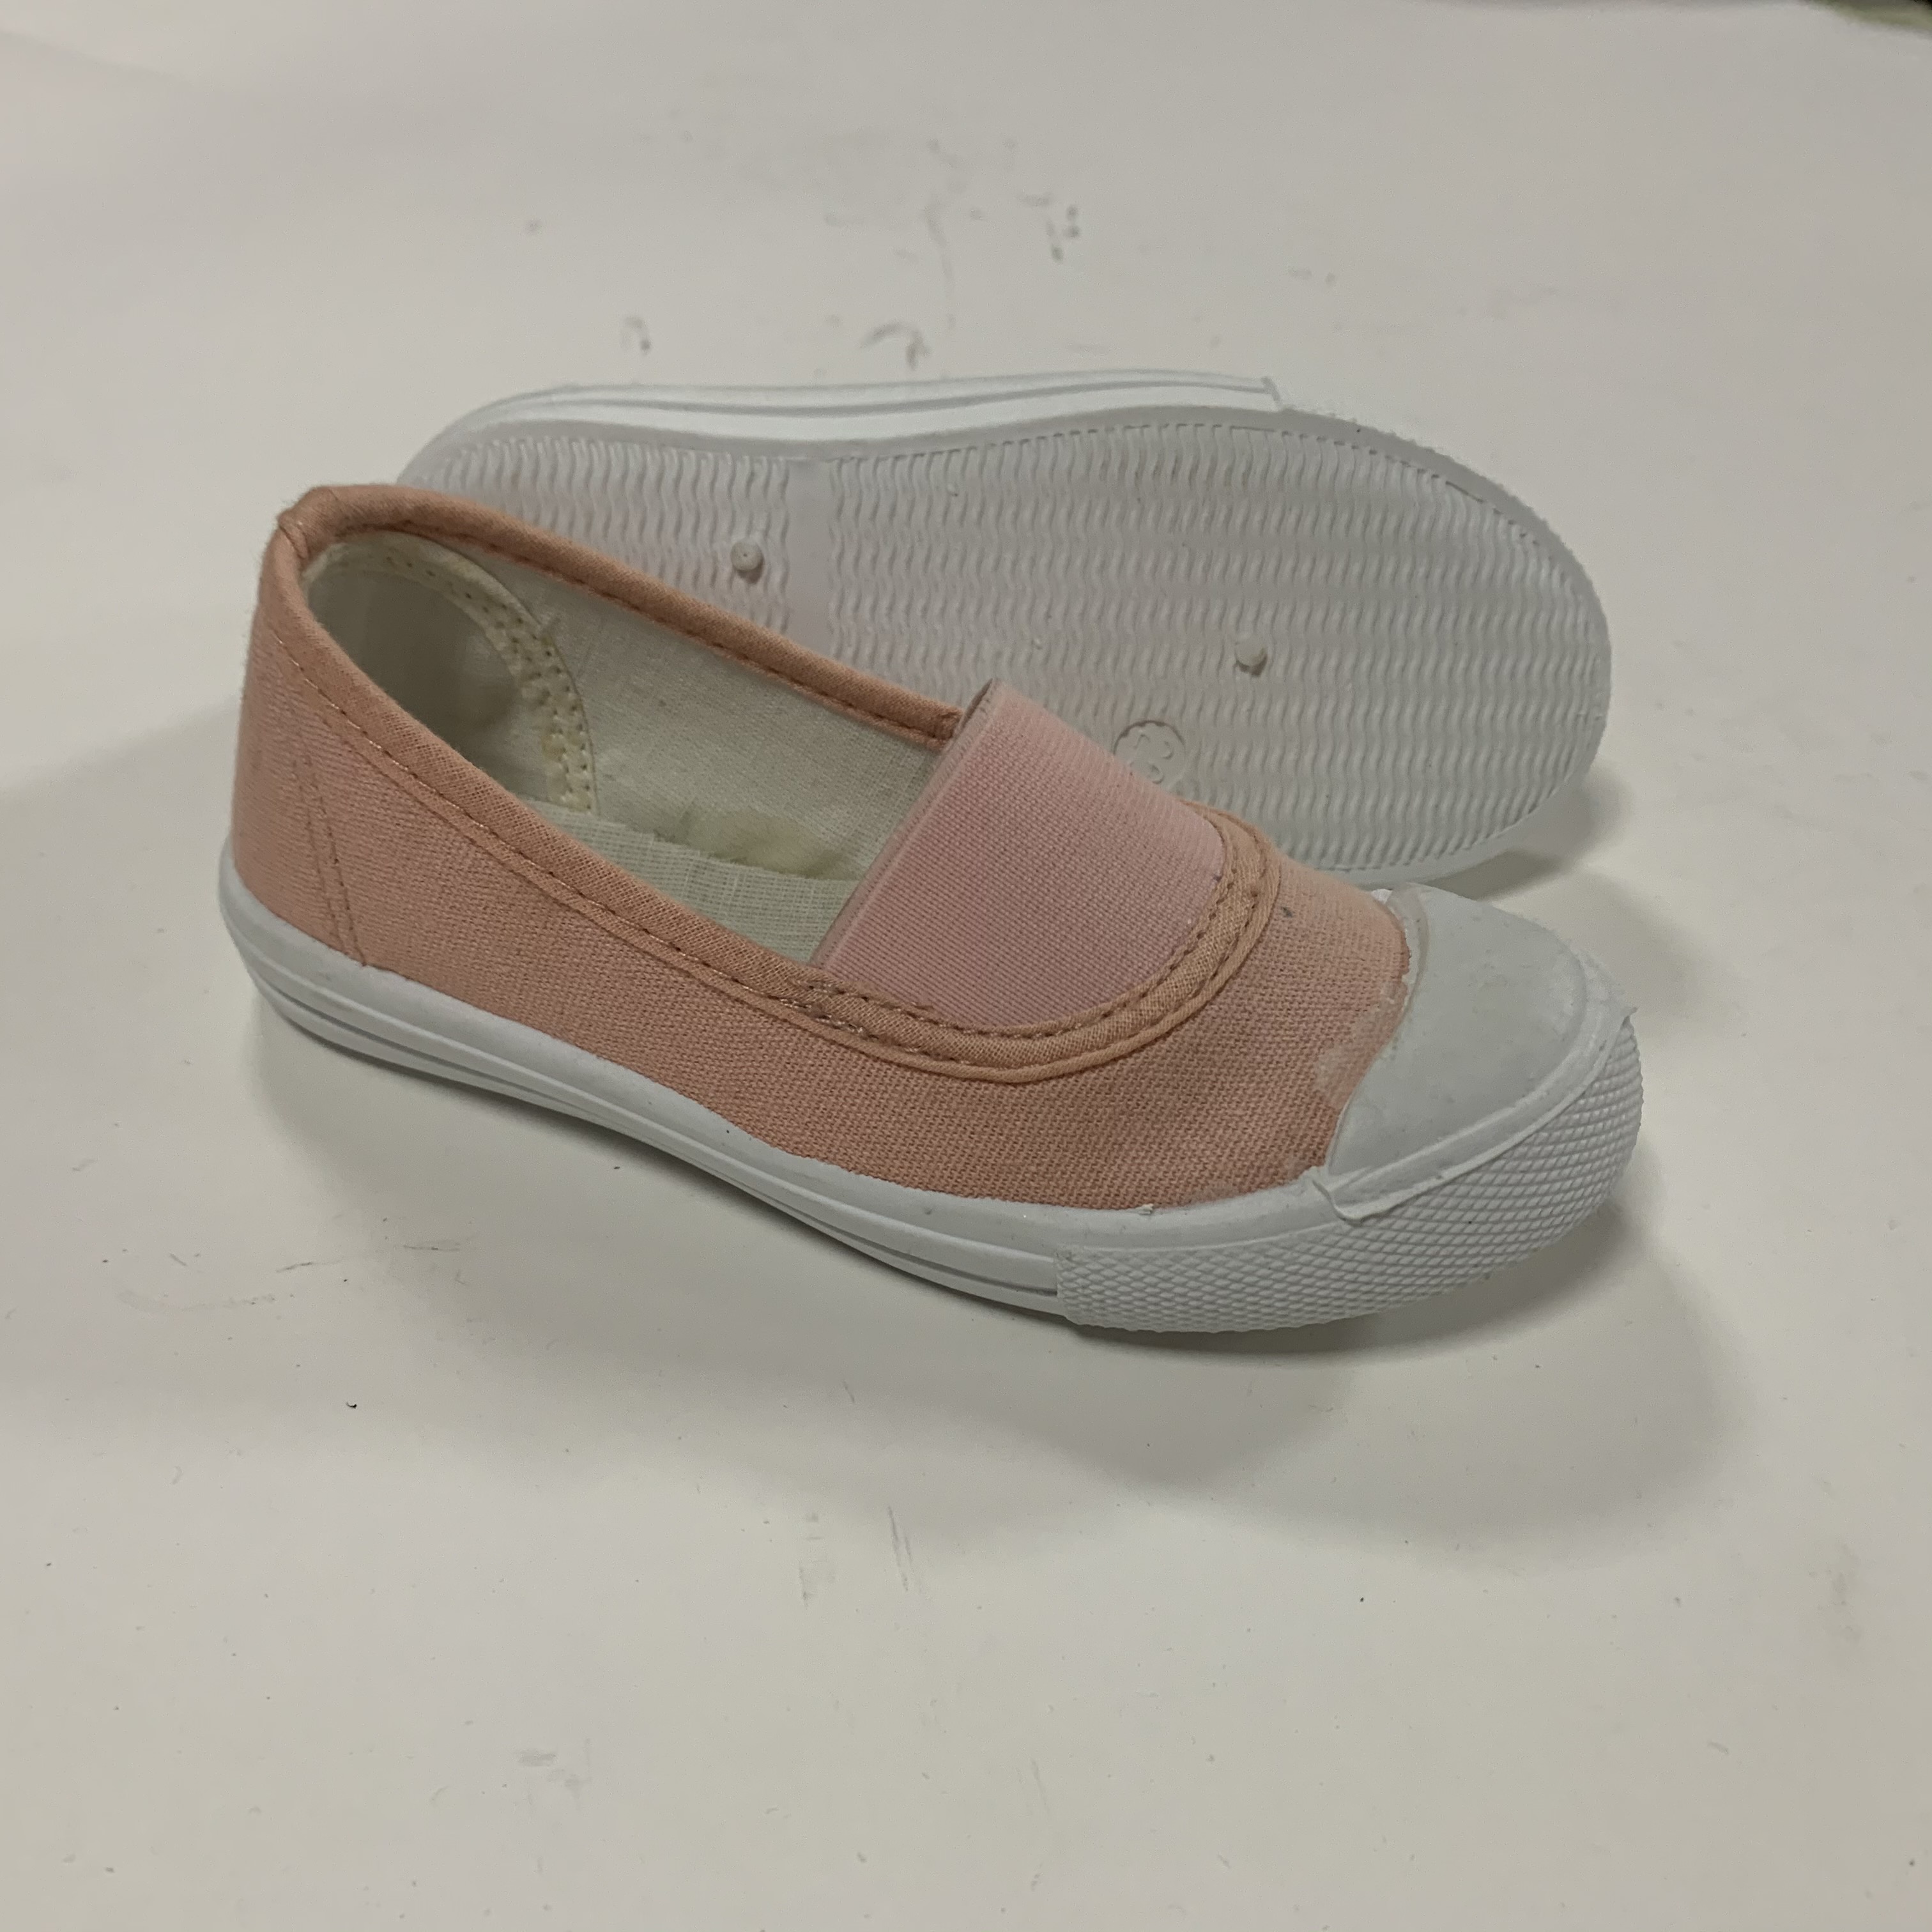 Kids' Casual Canvas Shoes Slip On Sneakers